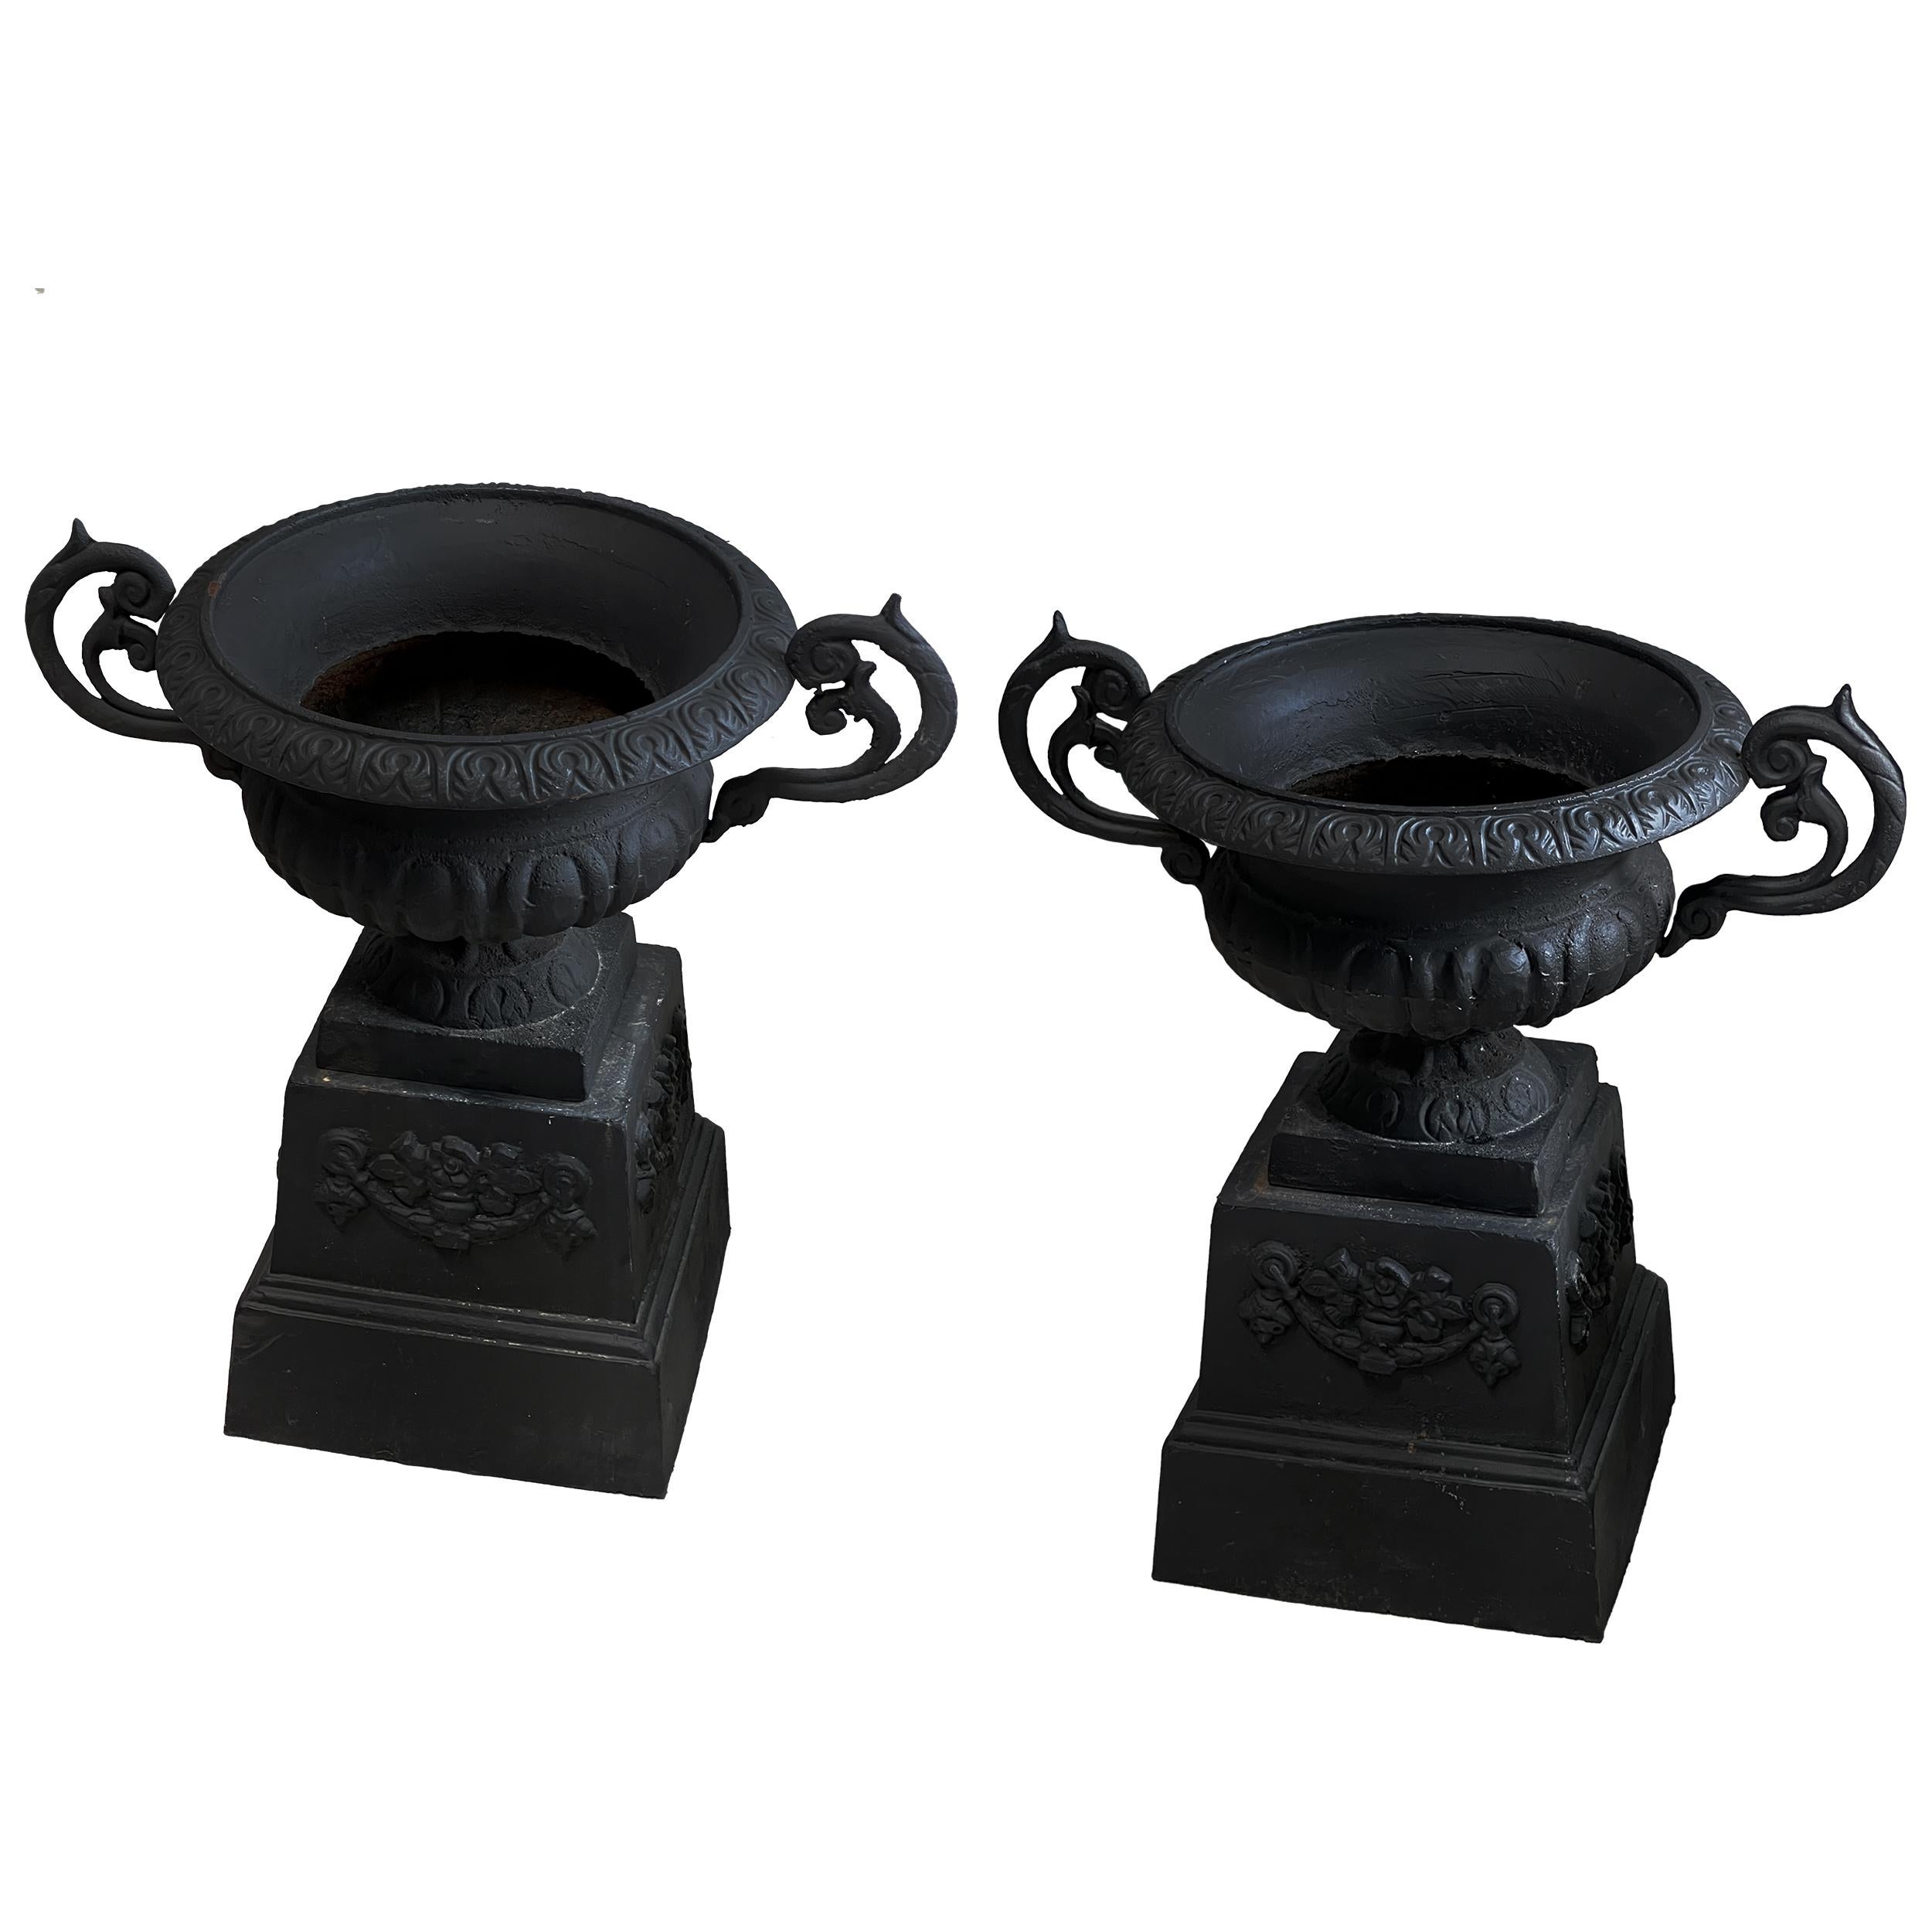 The Neoclassical Black Cast Iron Urns on Base/Plinth, are a captivating set of two garden urns / planters featuring c-scroll handles that exude timeless elegance. These urns bear a natural patina consistent with their antique age and usage, adding